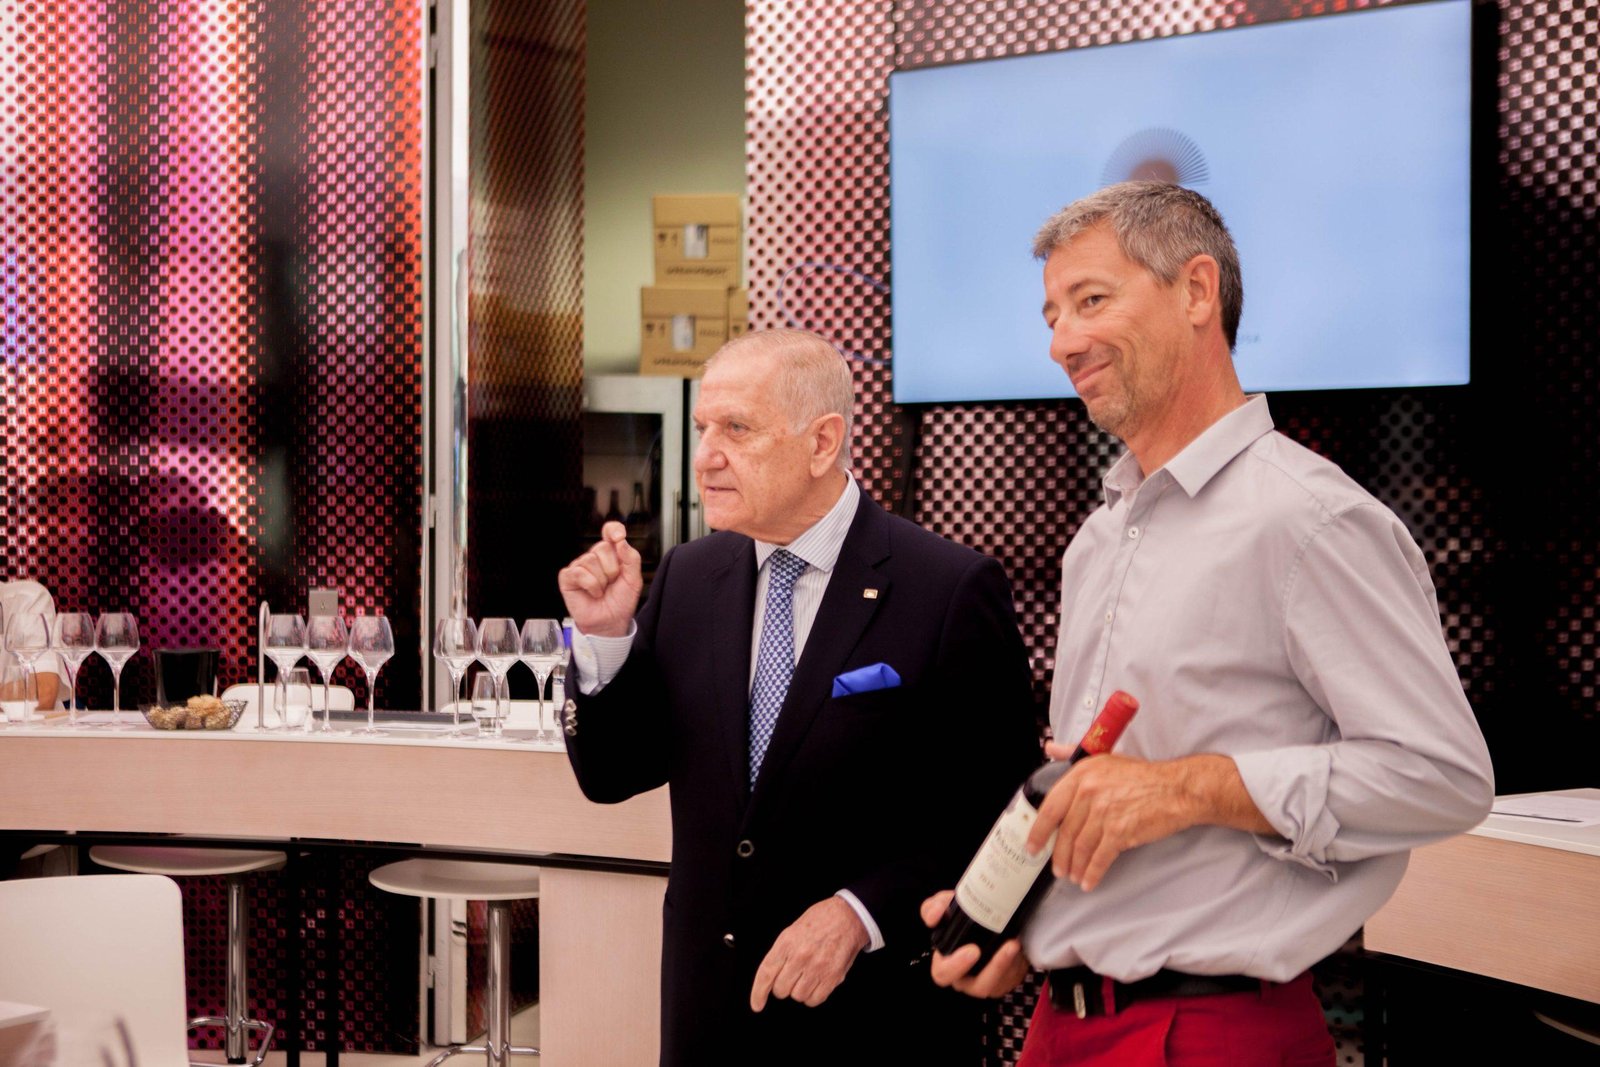 Wine Travel Awards and Vinos de La Luz joined forces at the Bordeaux Wine Week